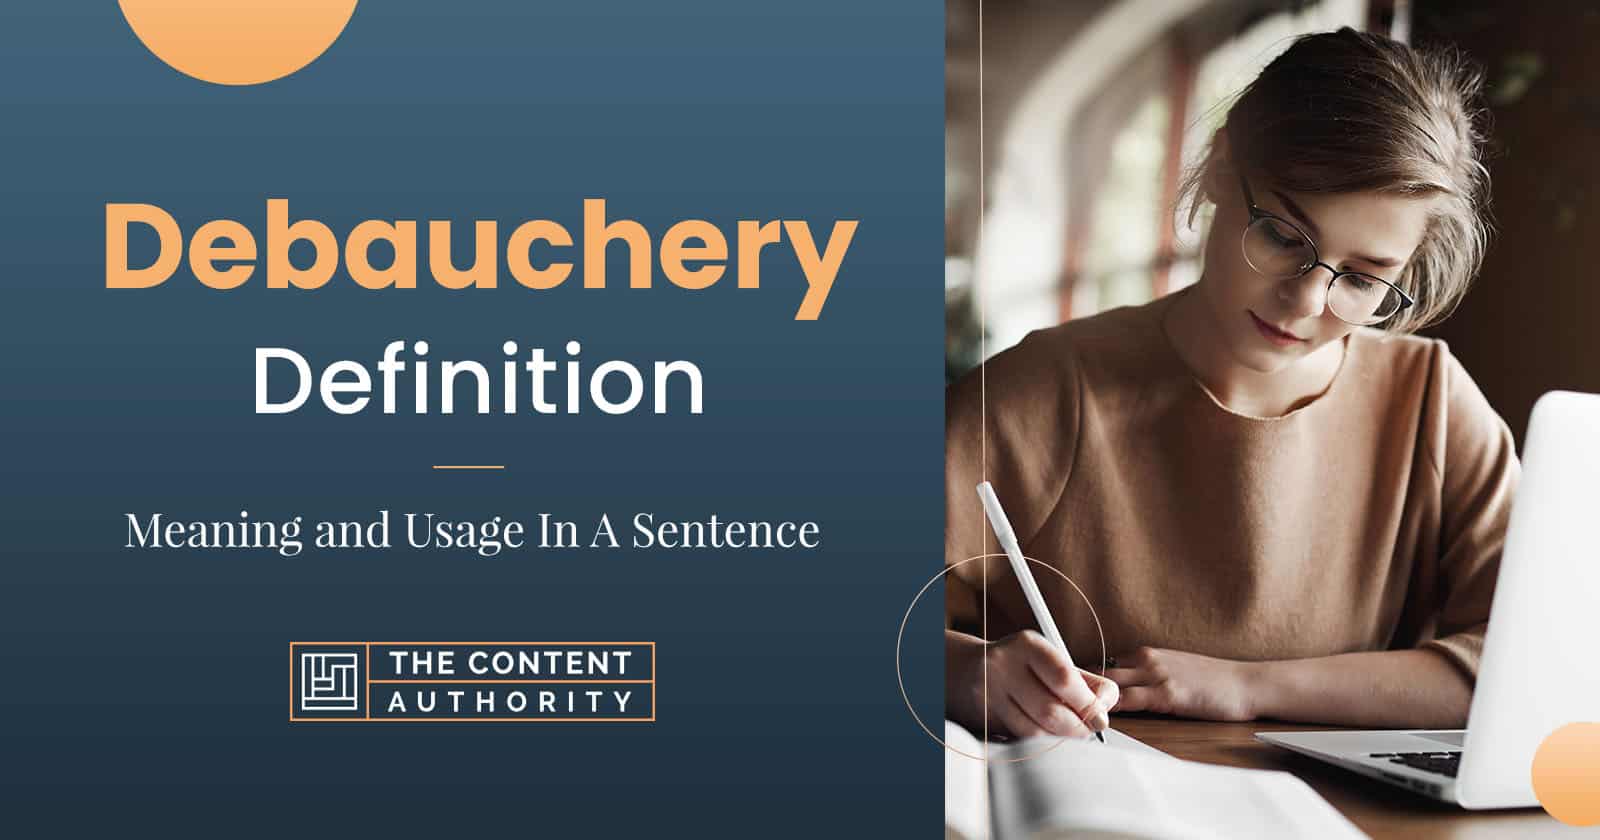 Debauchery Definition &#8211; Meaning and Usage in a Sentence